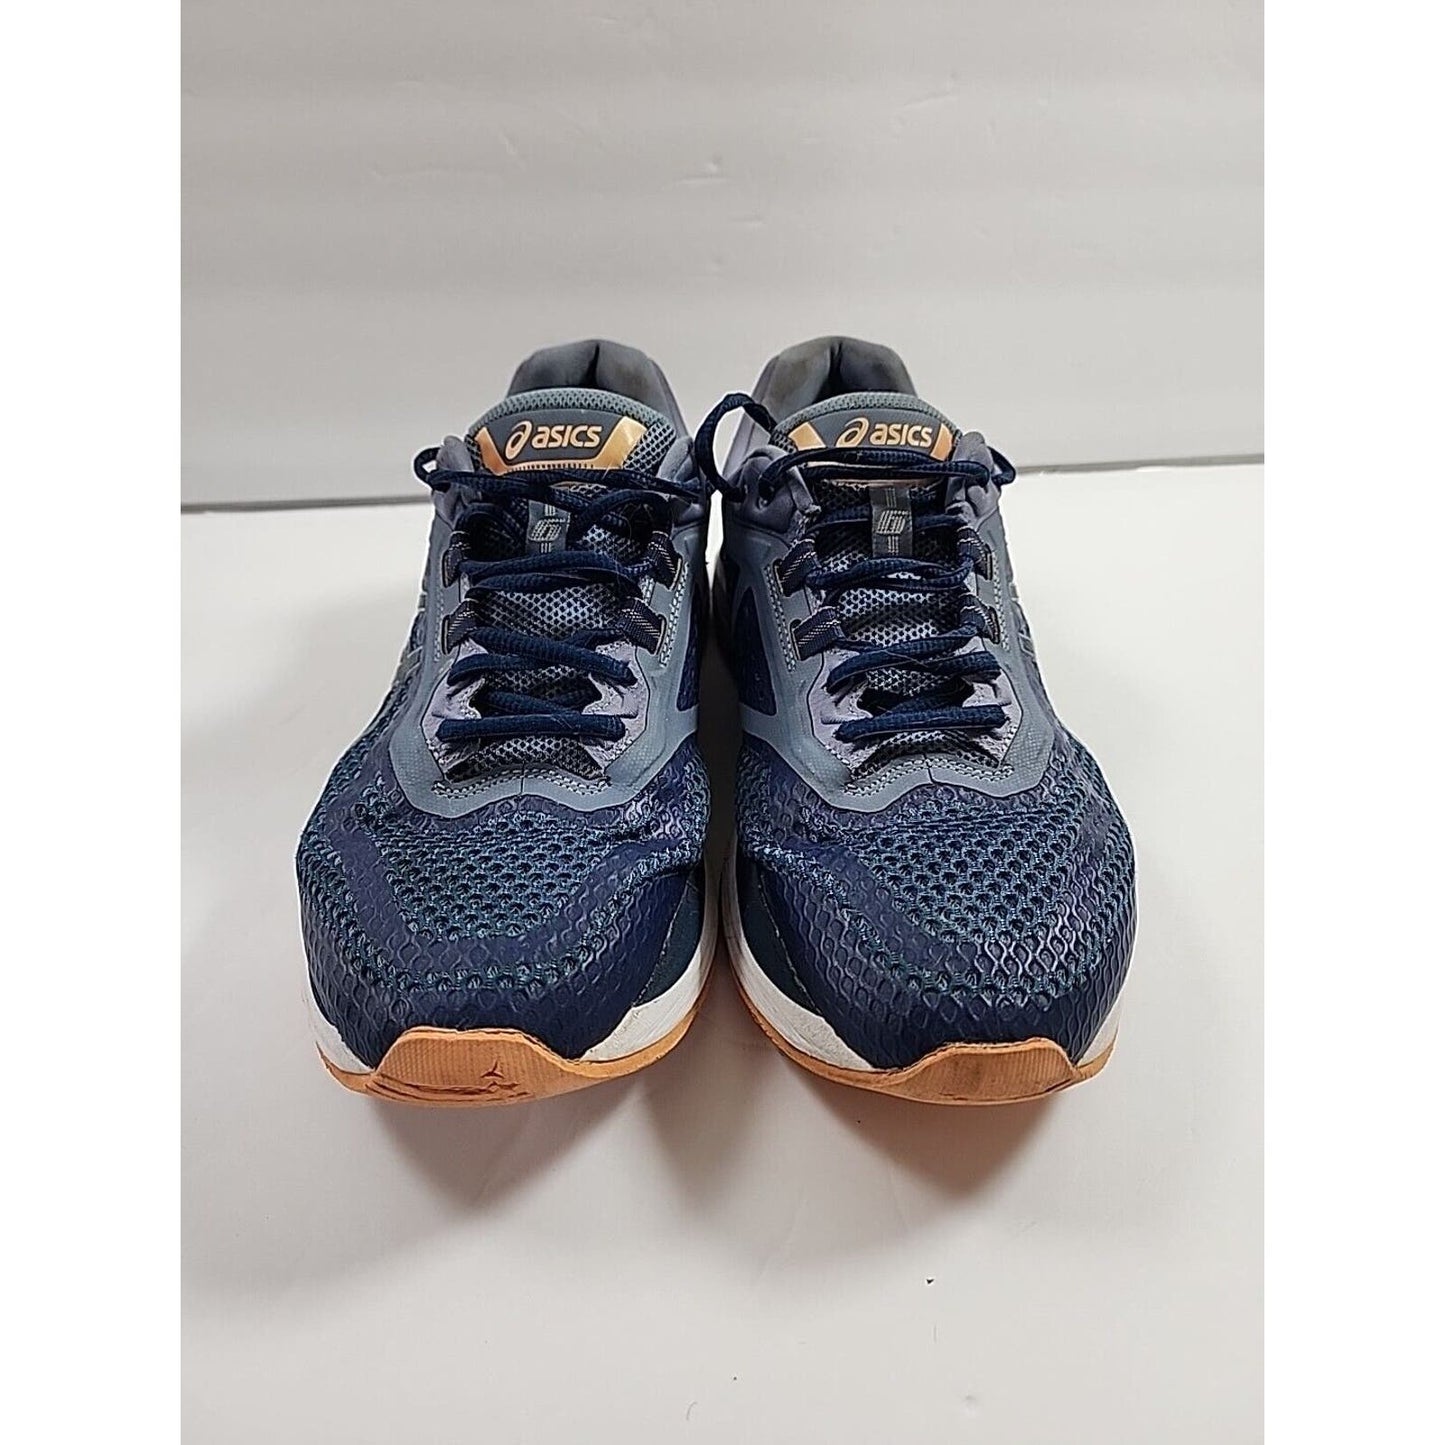 Asics Shoes Mens Size 10.5 GT-2000 6 Navy Orange Low Top Running Sneakers